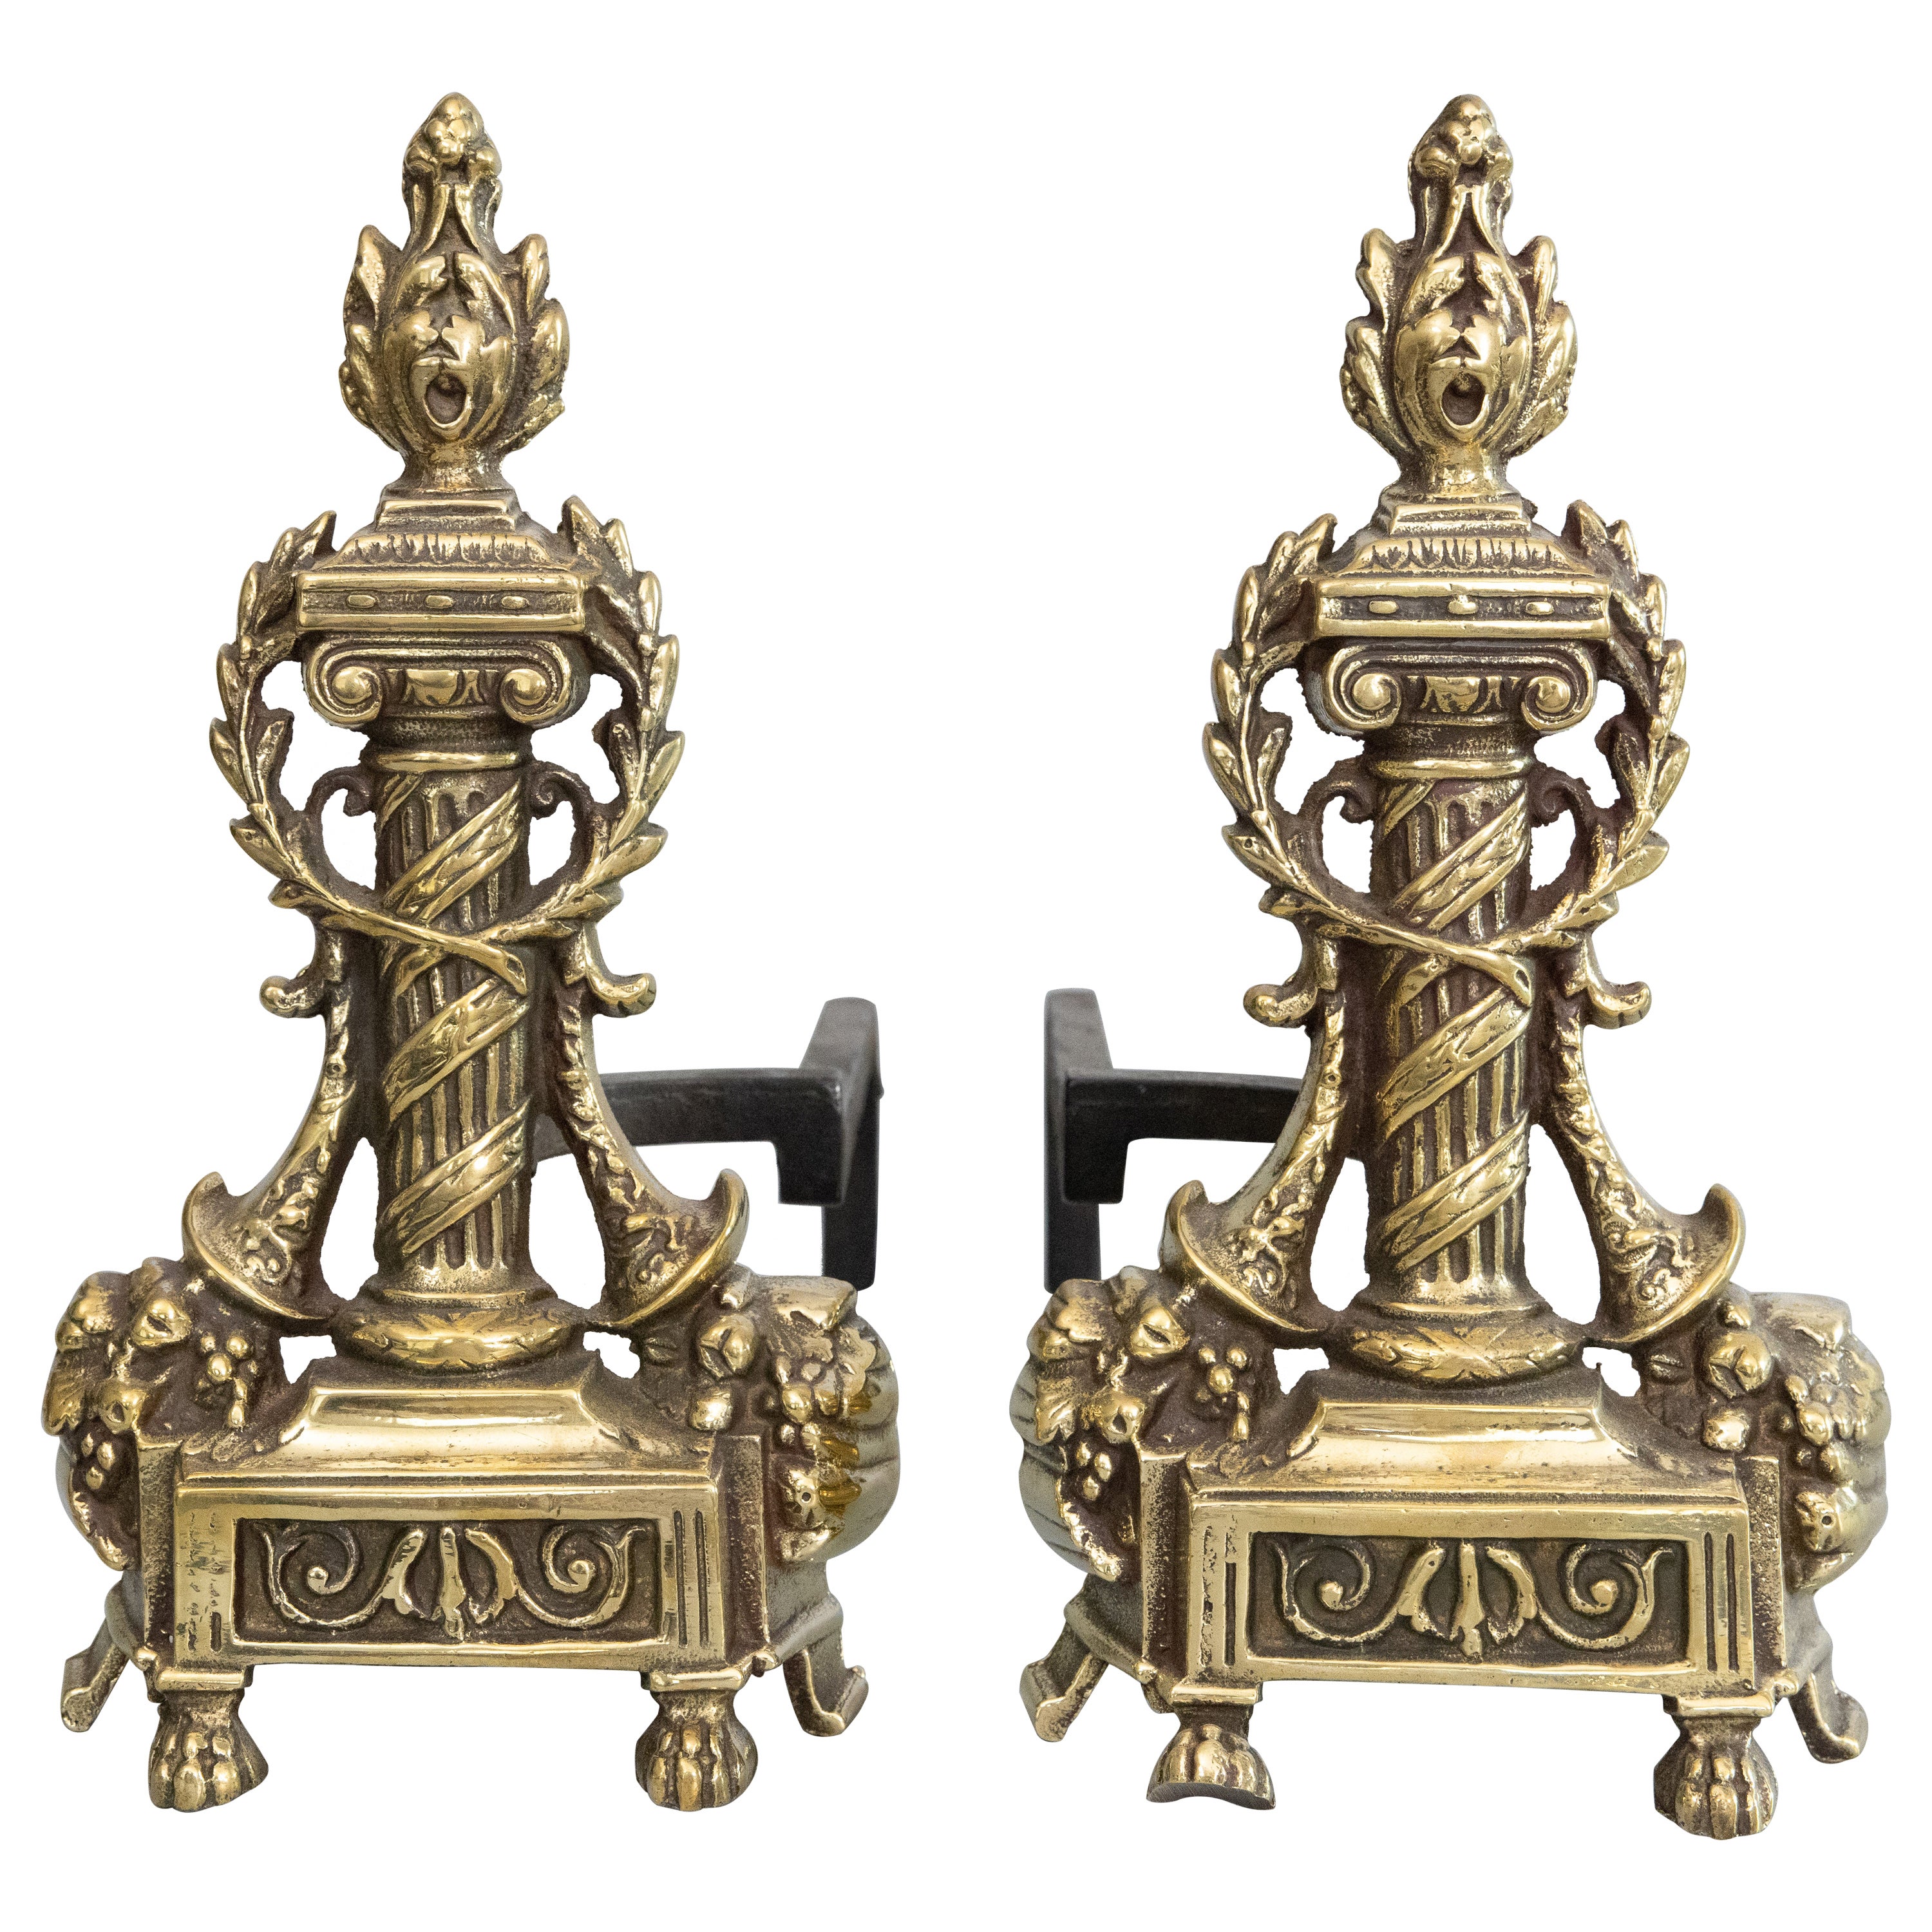 What are brass andirons used for?